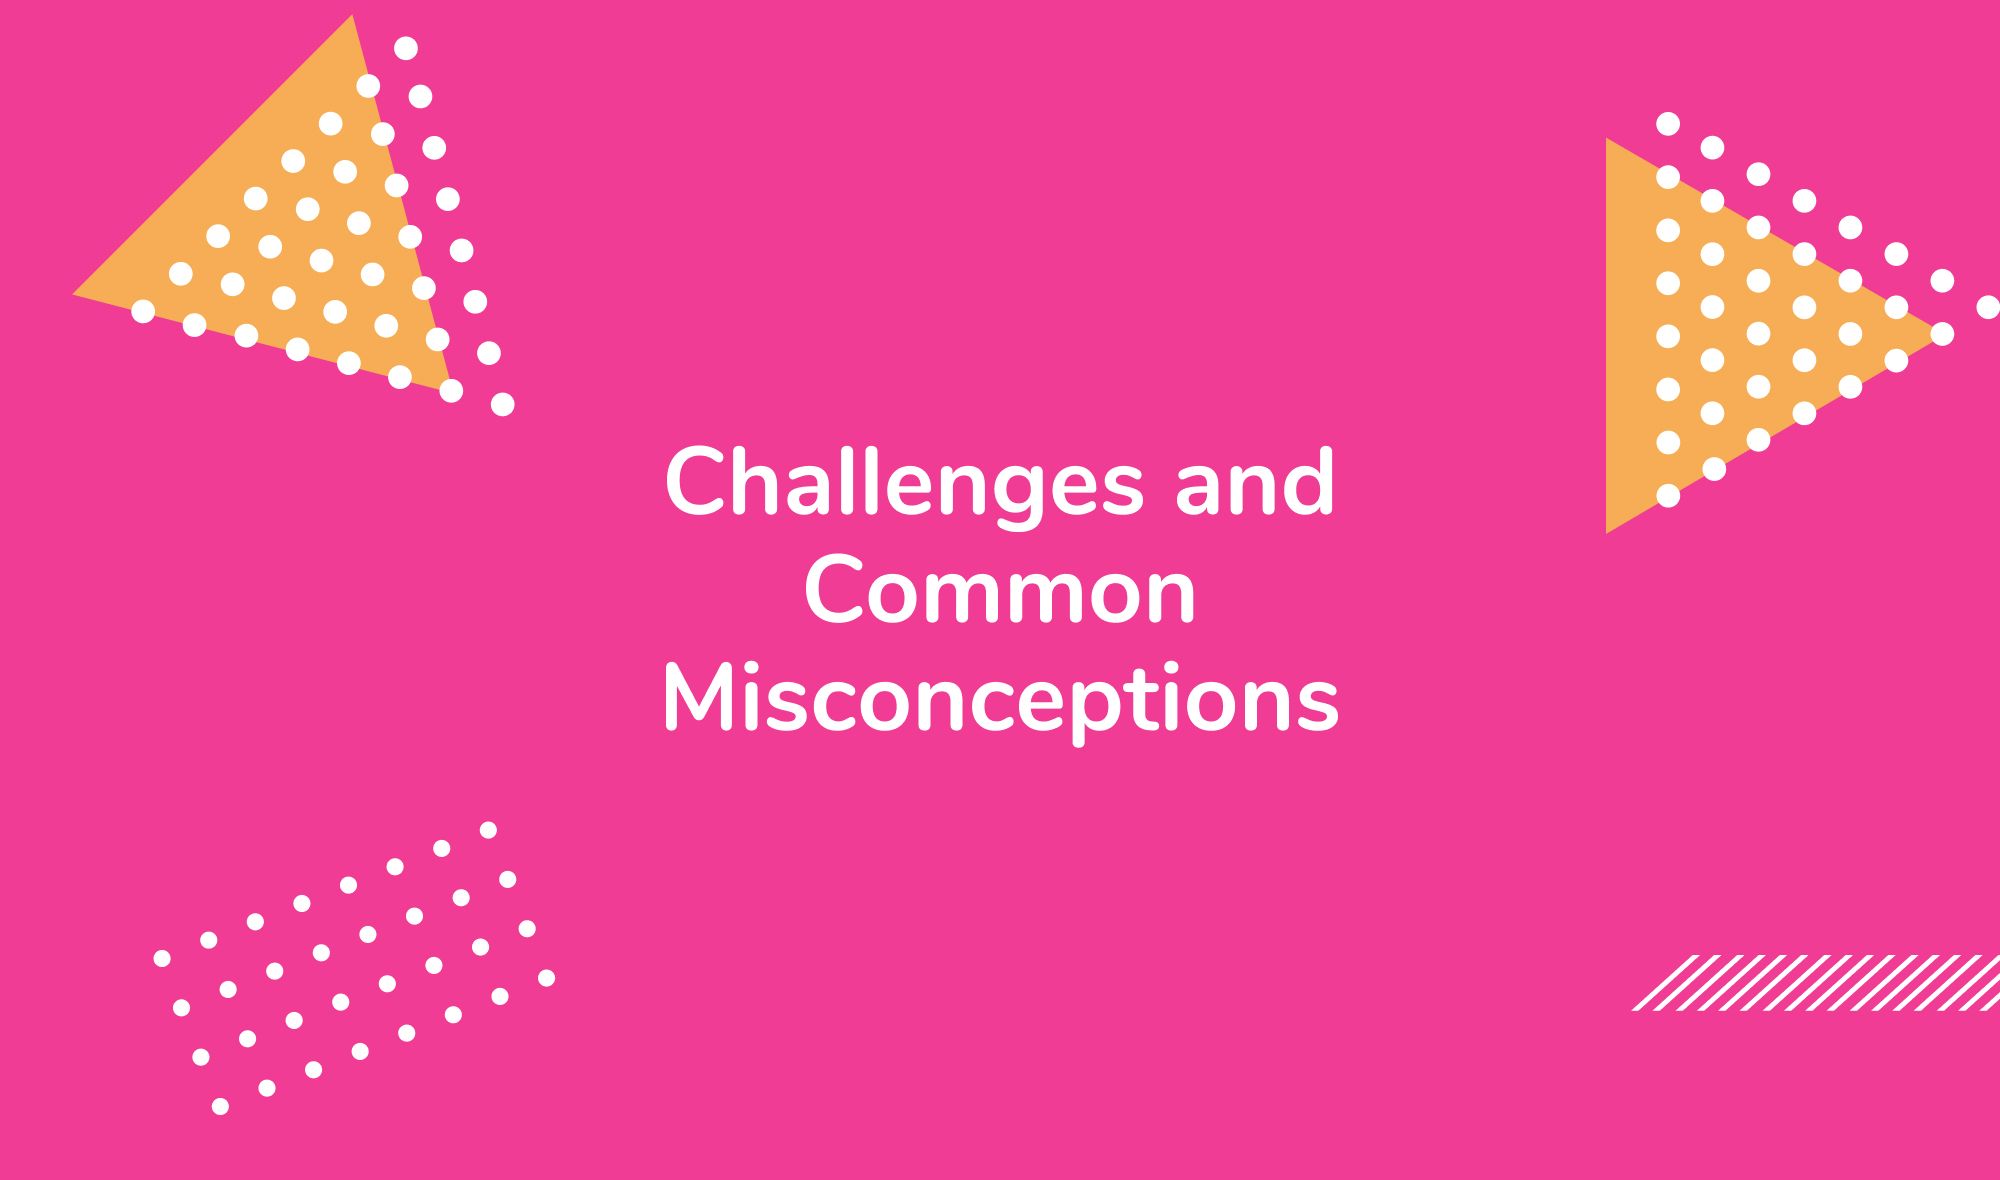 Challenges and Common Misconceptions about Self-Awareness